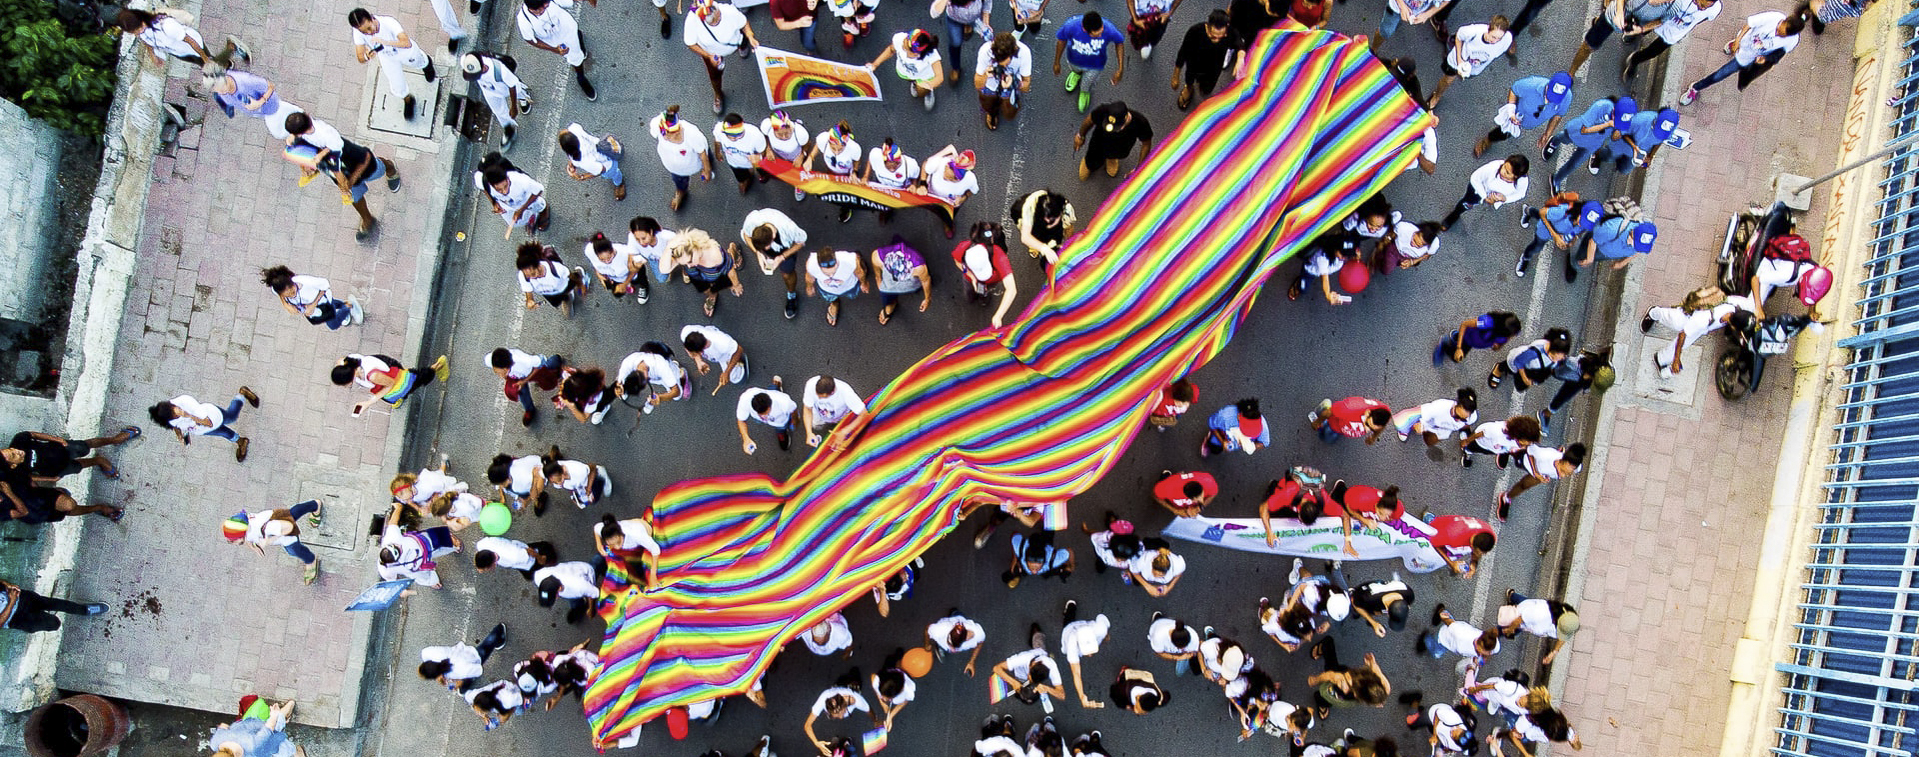 A group of people carrying an LGBTQ pride flag